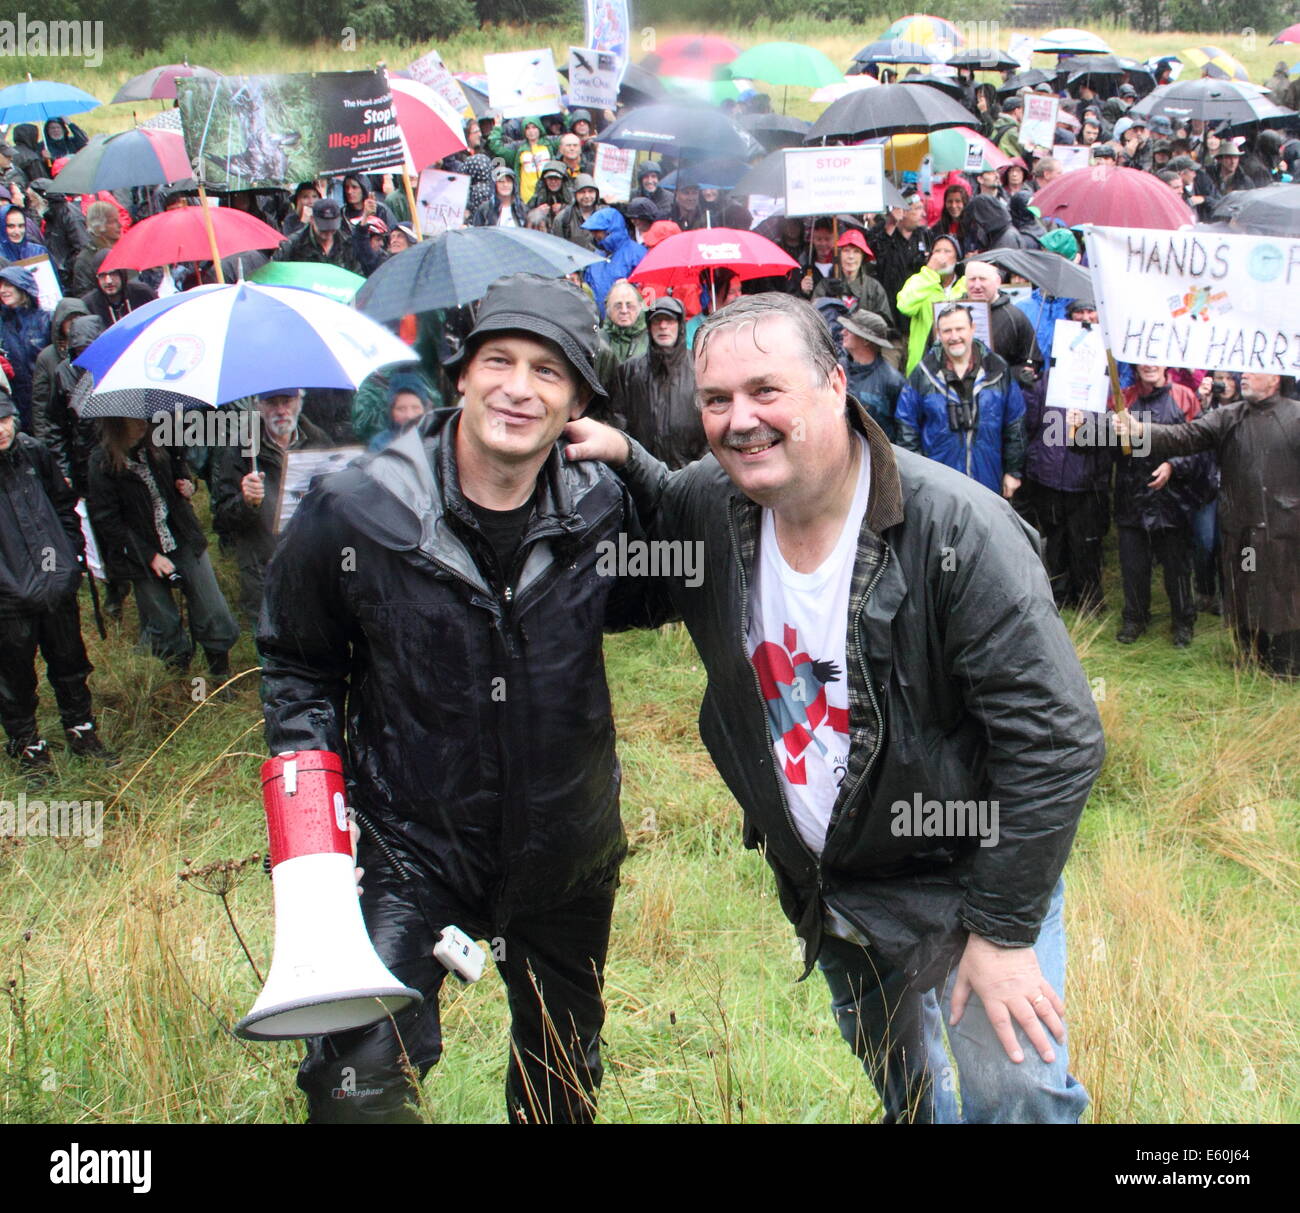 Peak District, Derbyshire, UK.  10th August, 2014. Two days before grouse shooting season opens, protesters led by BBC presenter, Chris Packham (L) and former RSPB Conservation Director, Mark Avery (R) gather by Derwent Dam, Upper Derwent Valley to express their opposition to the killing of hen harriers. According to the RSPB, Northern England’s uplands should have 320 pairs of breeding hen harriers but no chicks were raised in England in ‘13. Credit:  Deborah Vernon/Alamy Live News Stock Photo